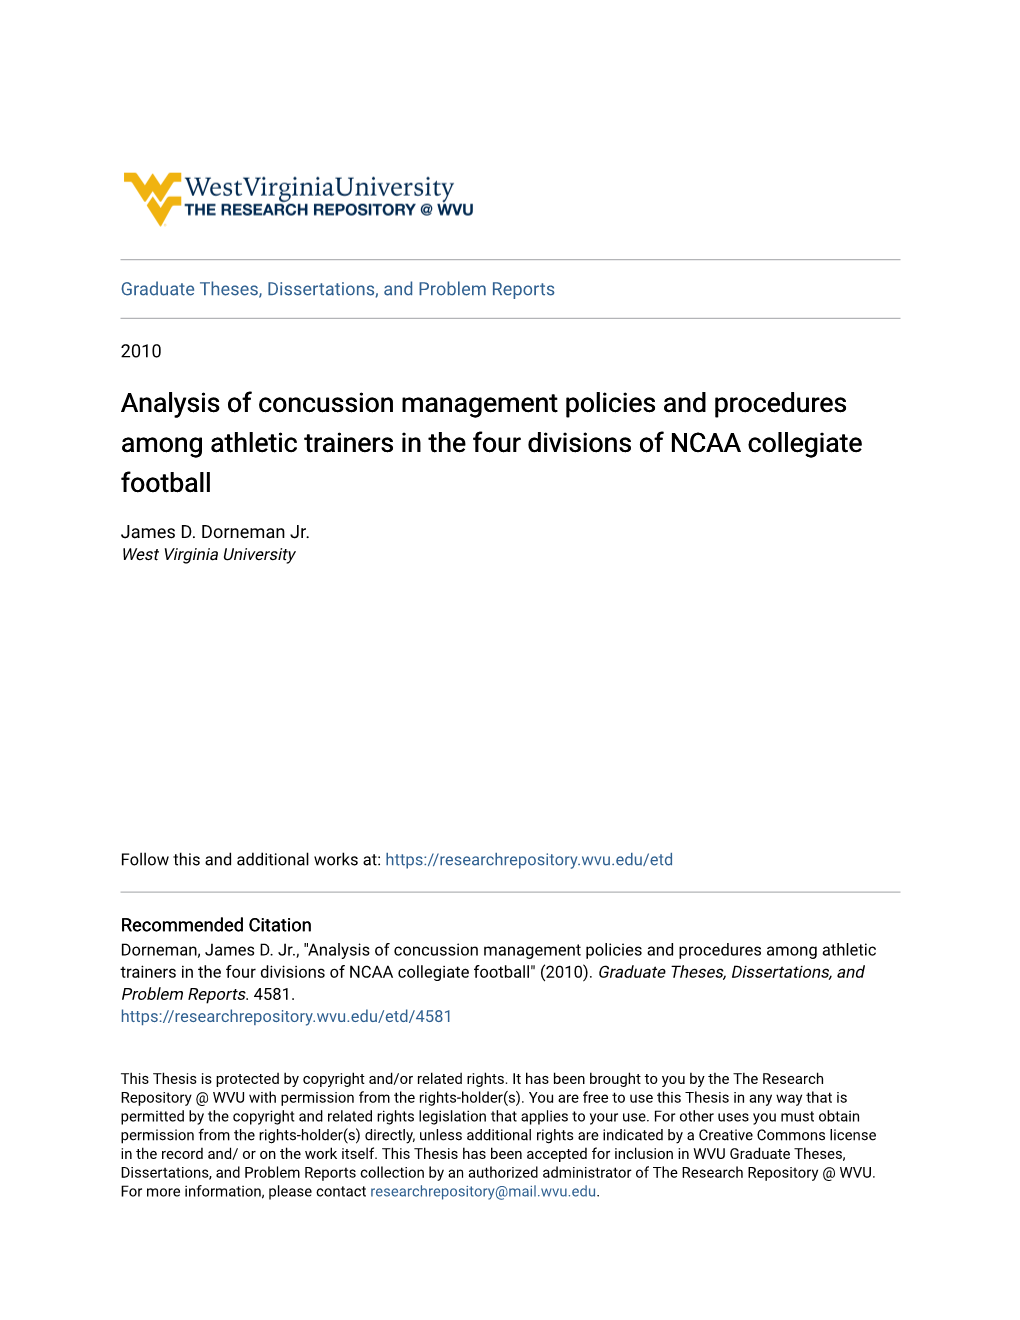 Analysis of Concussion Management Policies and Procedures Among Athletic Trainers in the Four Divisions of NCAA Collegiate Football